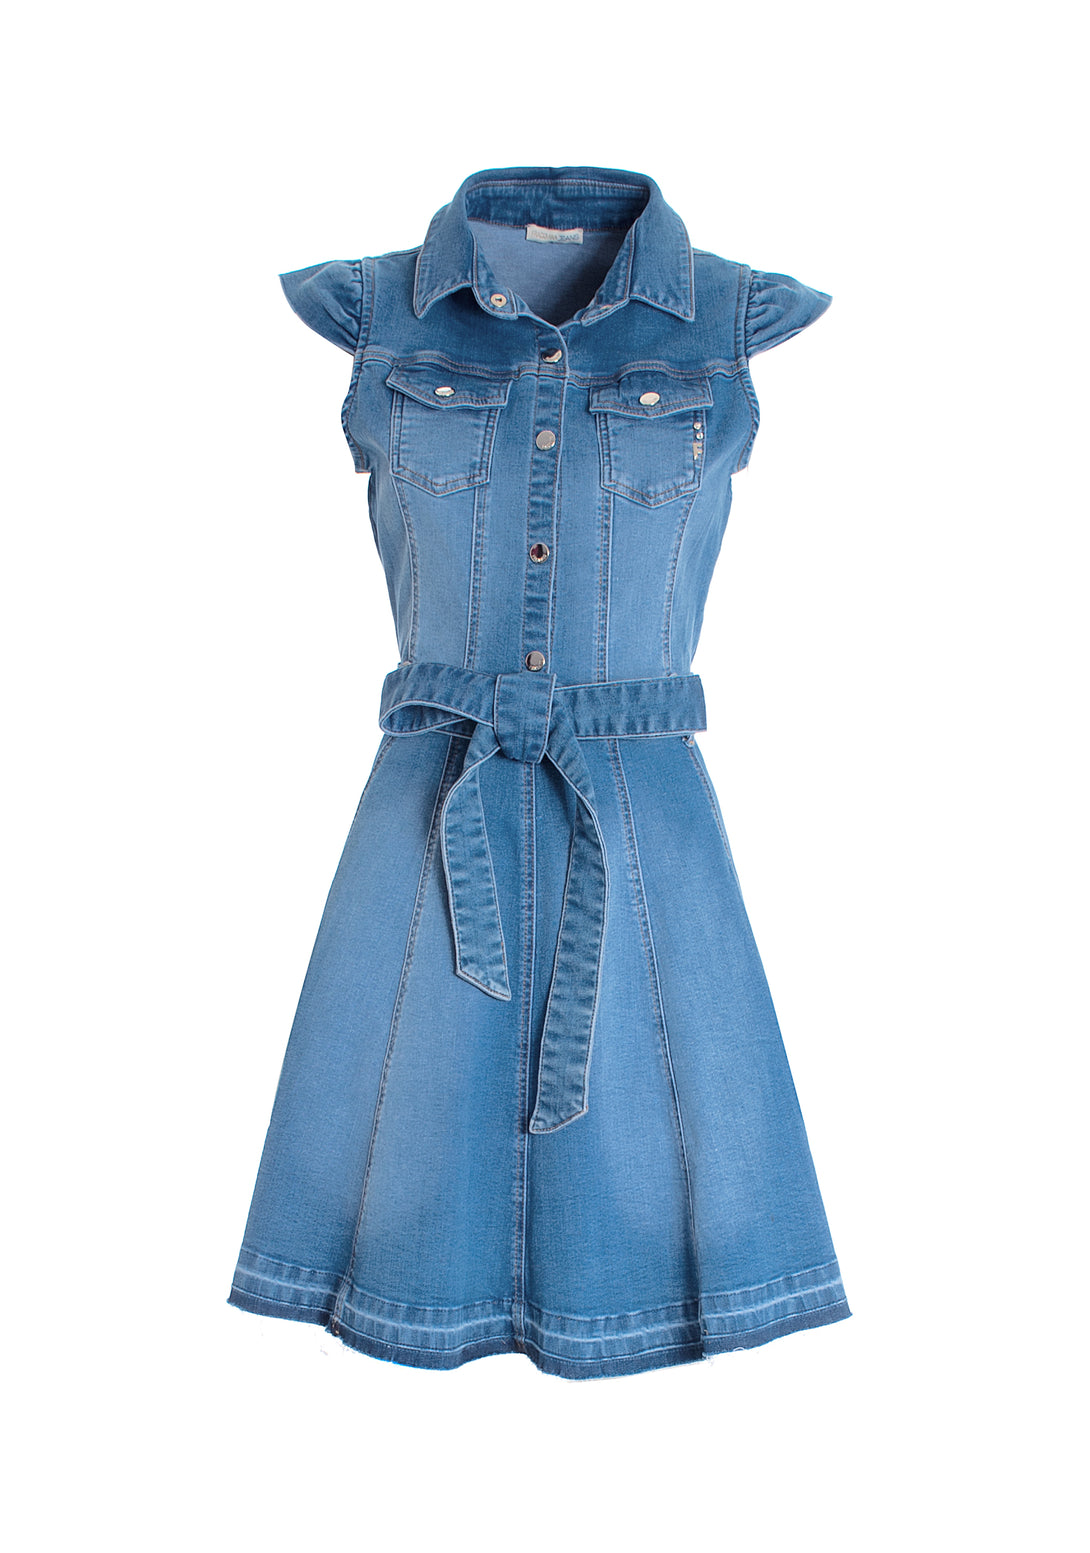 Chemisier dress with no sleeves made in denim with middle wash